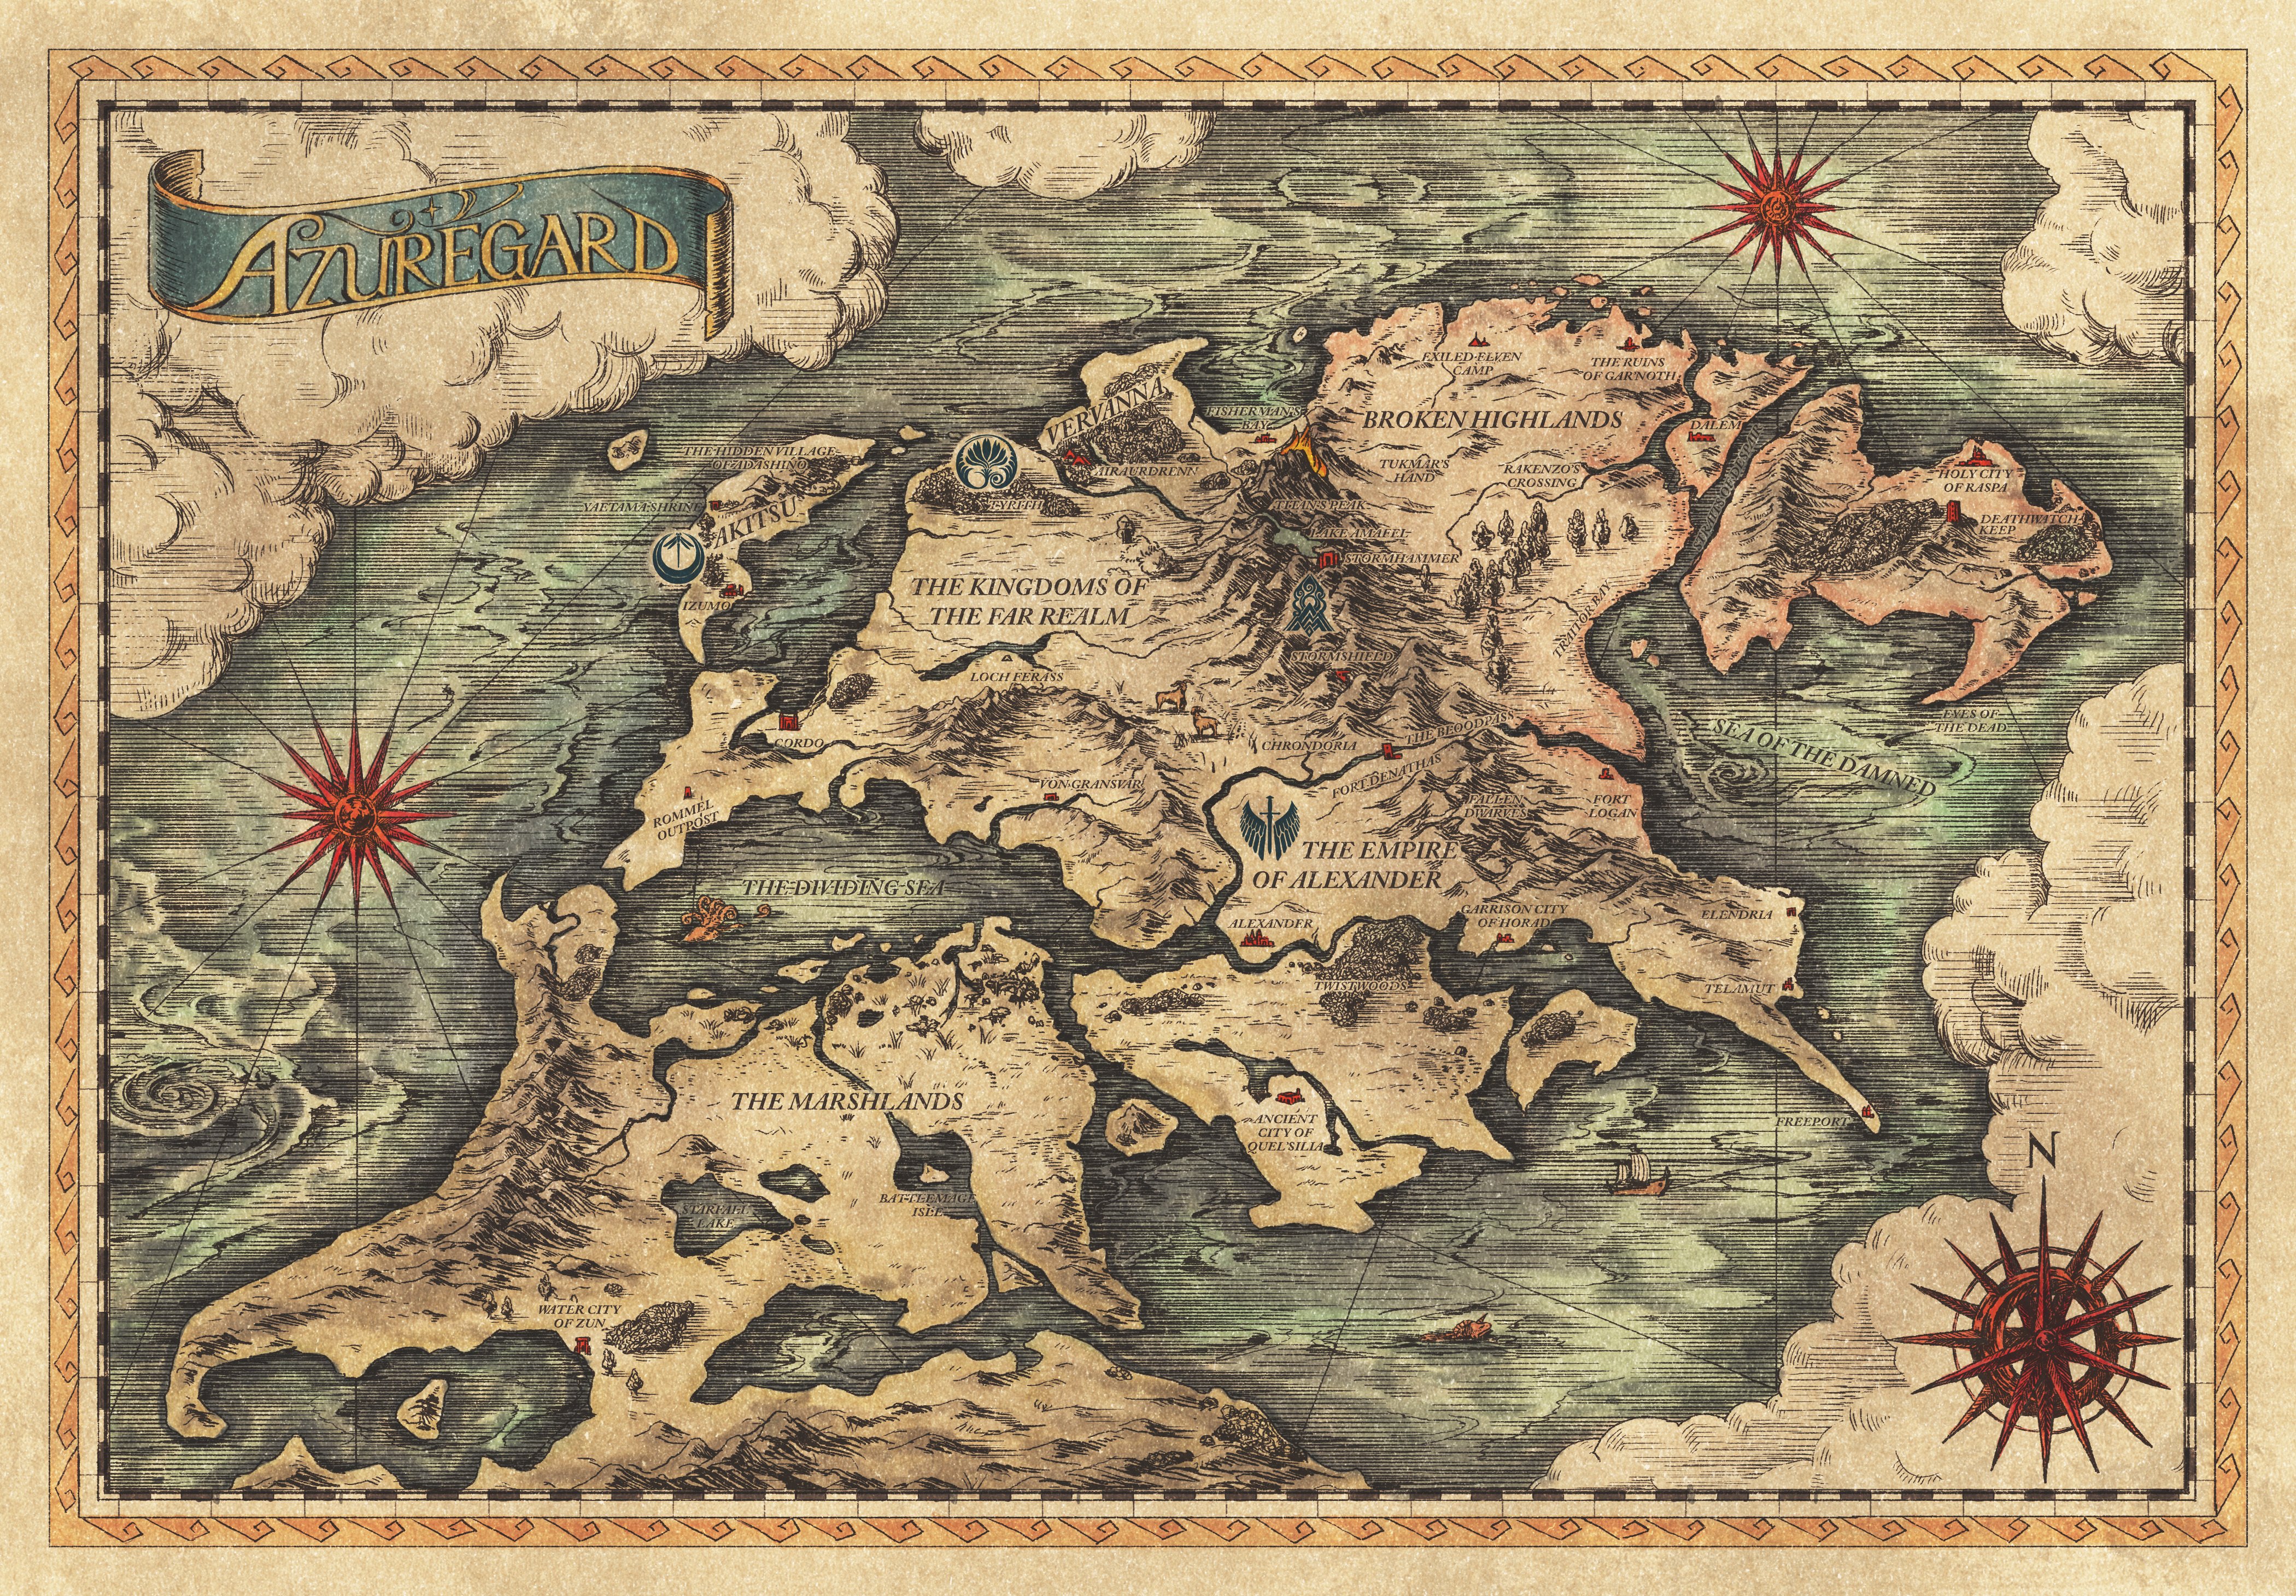 Game of Thrones World Map Wallpaper Anime Game Map h Wallpaper